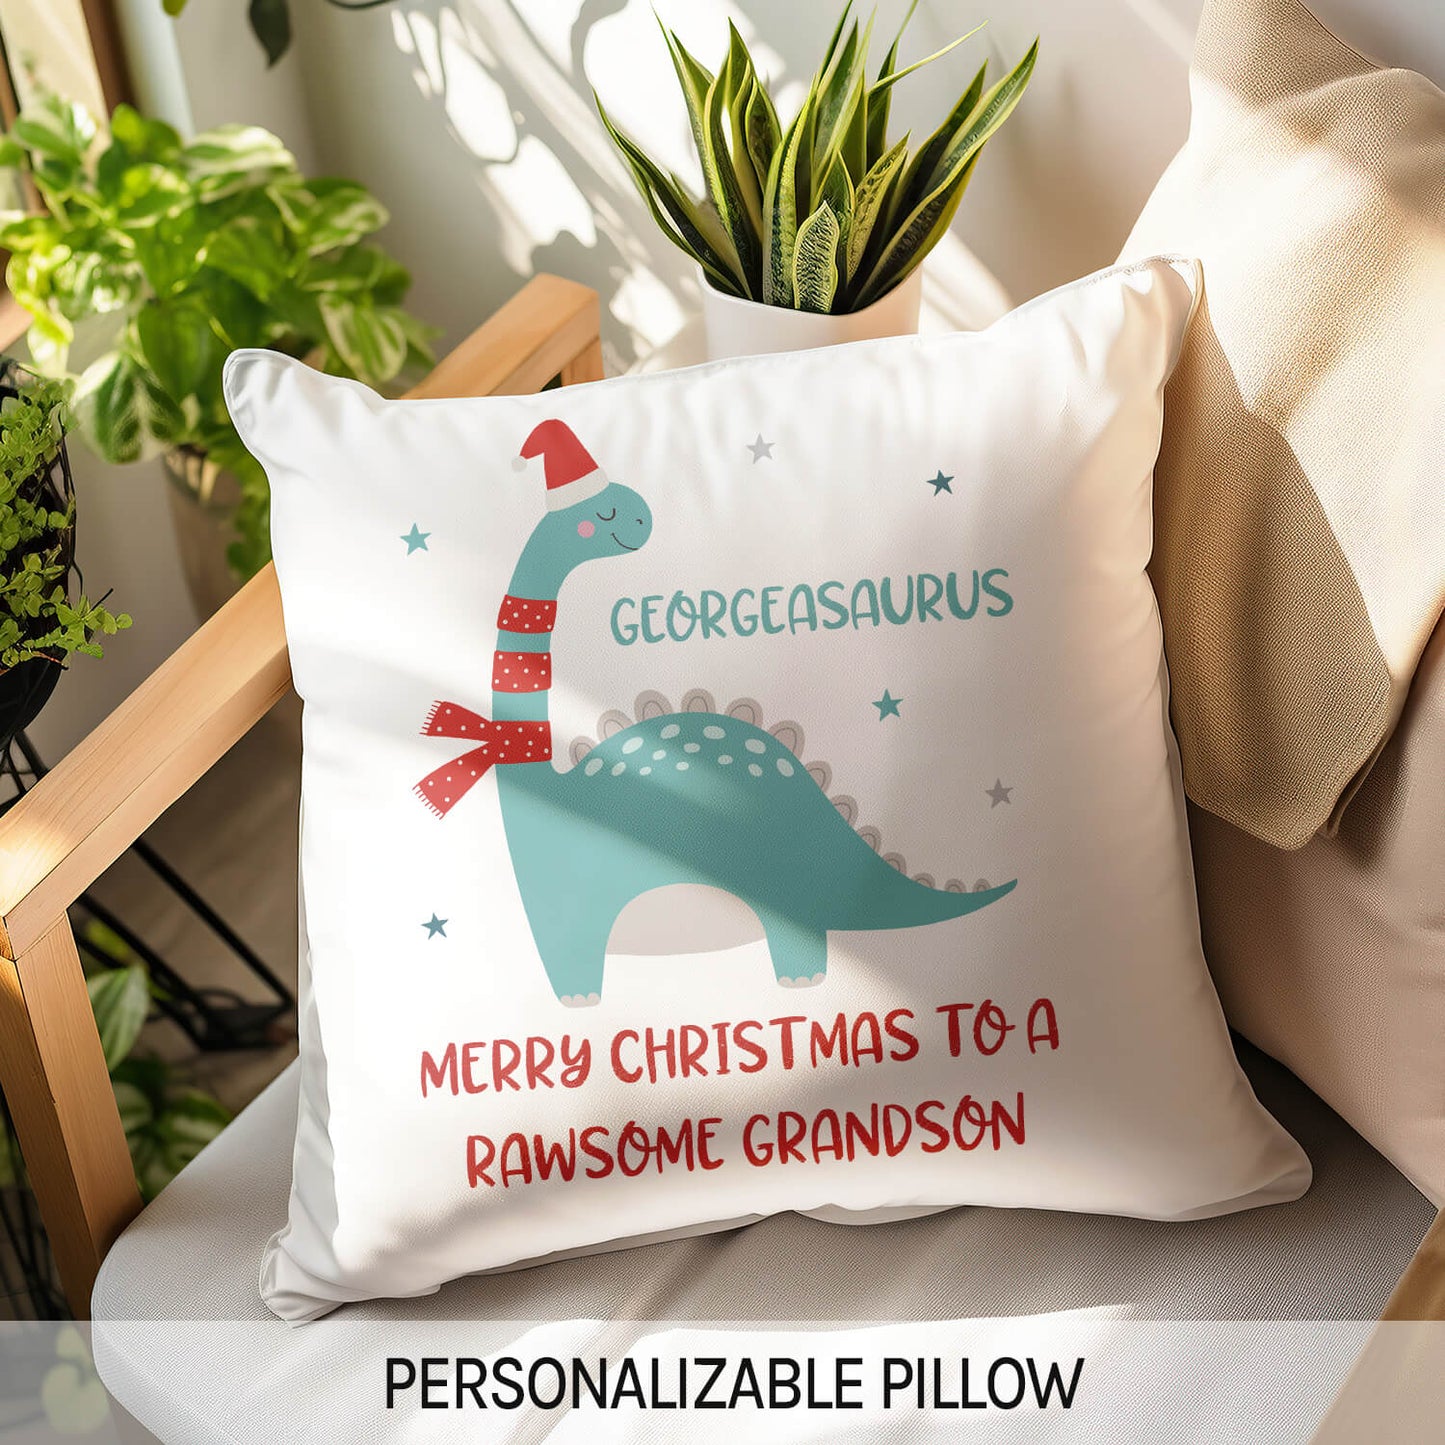 Merry Christmas To A Rawsome Grandson - Personalized Christmas gift For Grandson - Custom Pillow - MyMindfulGifts